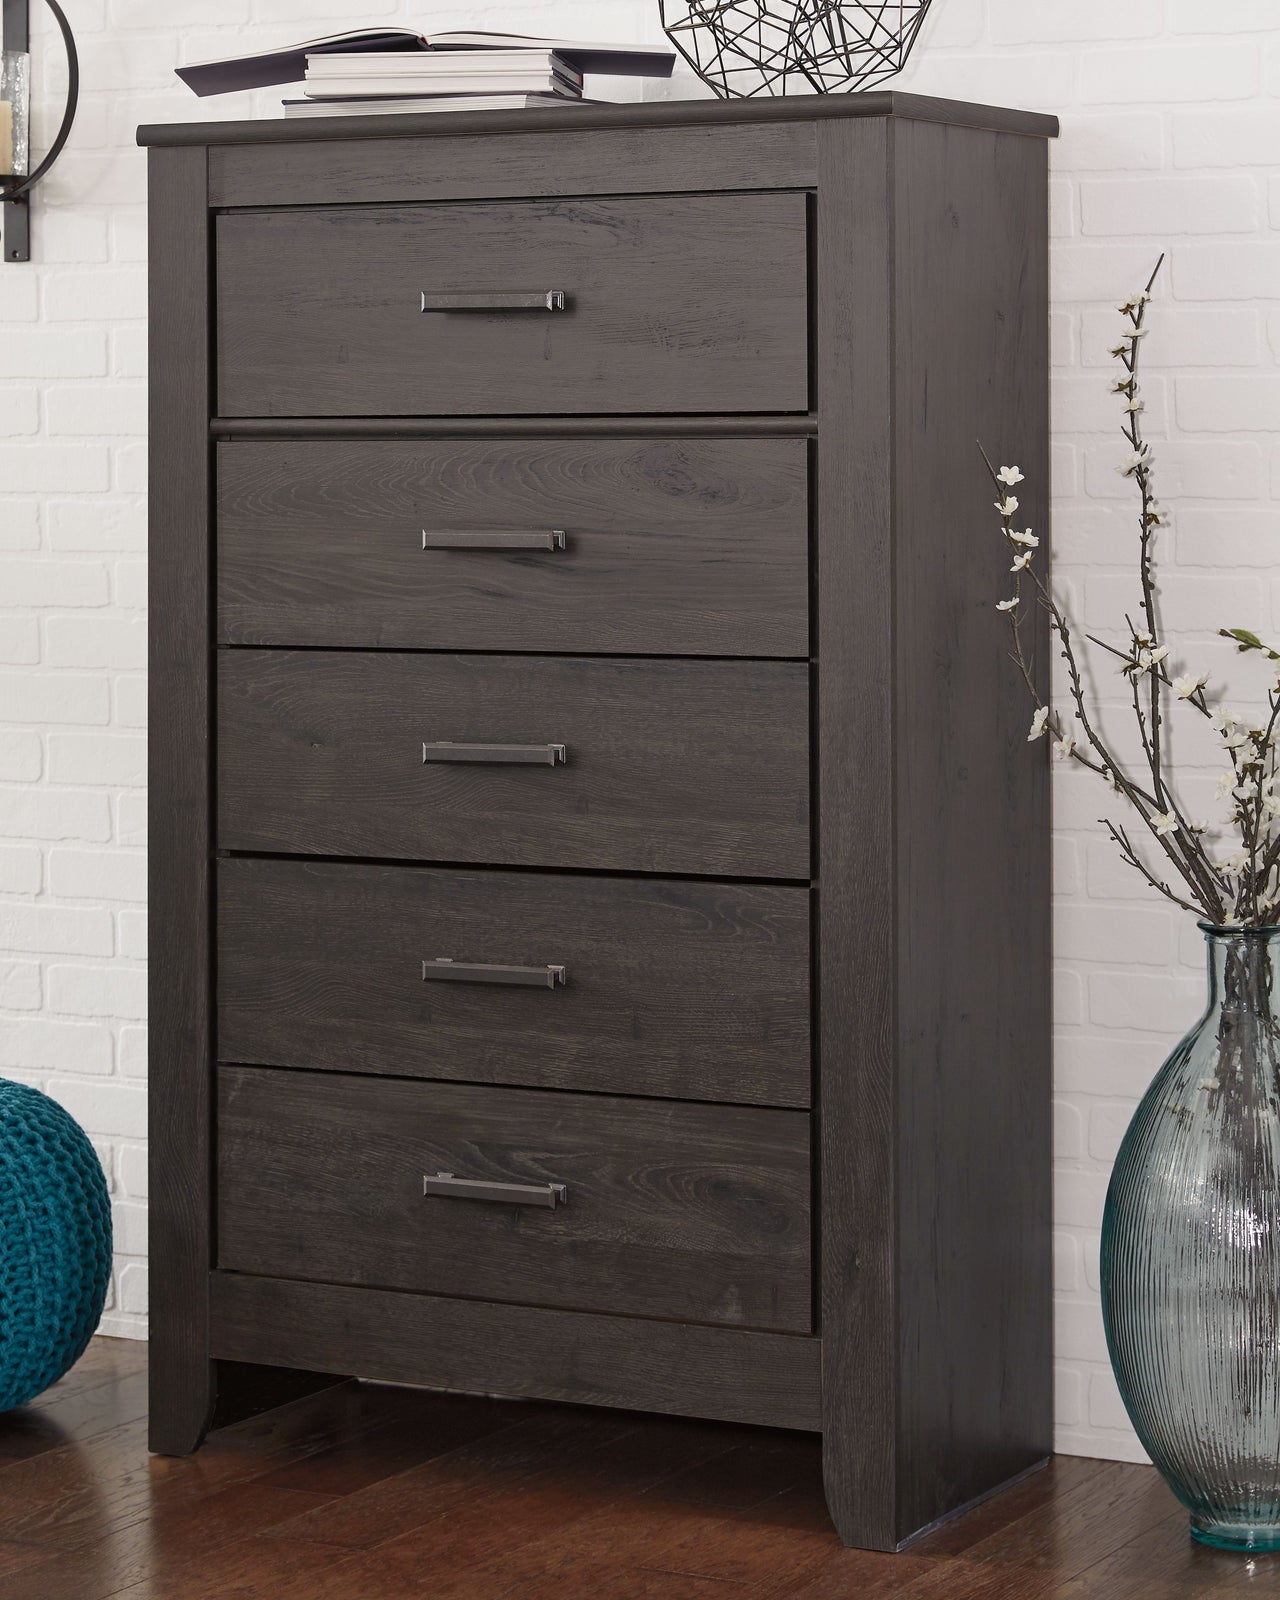 Brinxton - Charcoal - Five Drawer Chest - Tony's Home Furnishings